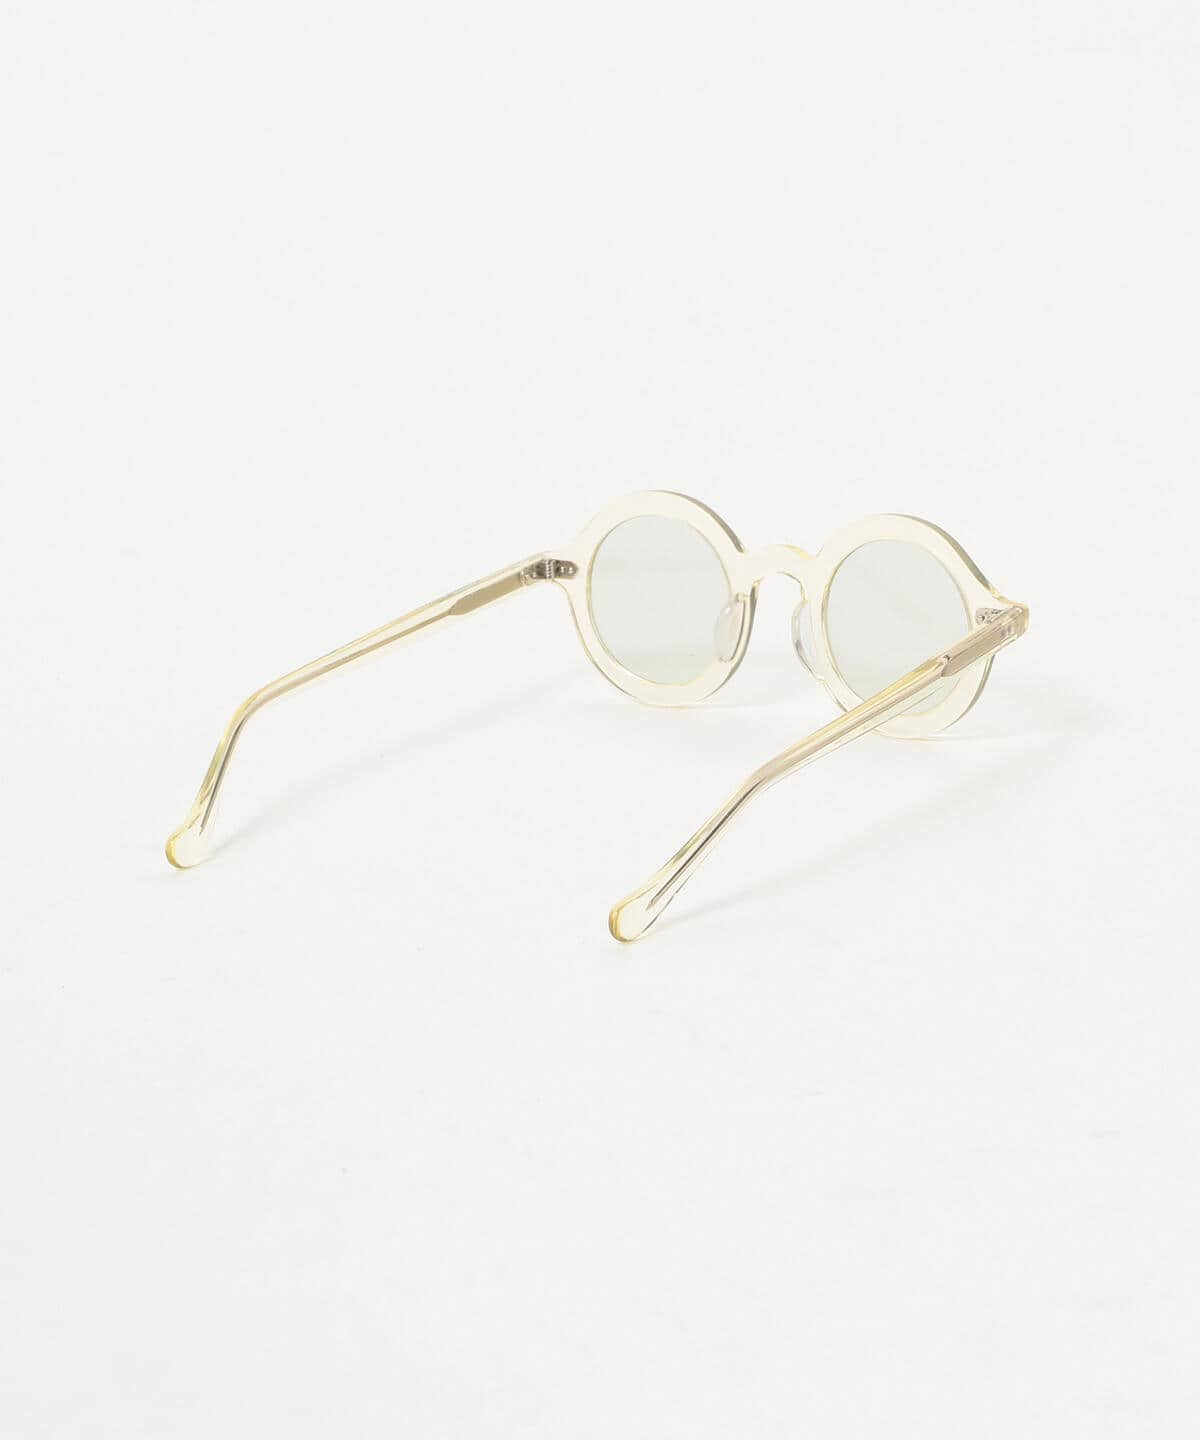 BEAMS Side Effects Eye Products / SE01 (fashion goods sunglasses 